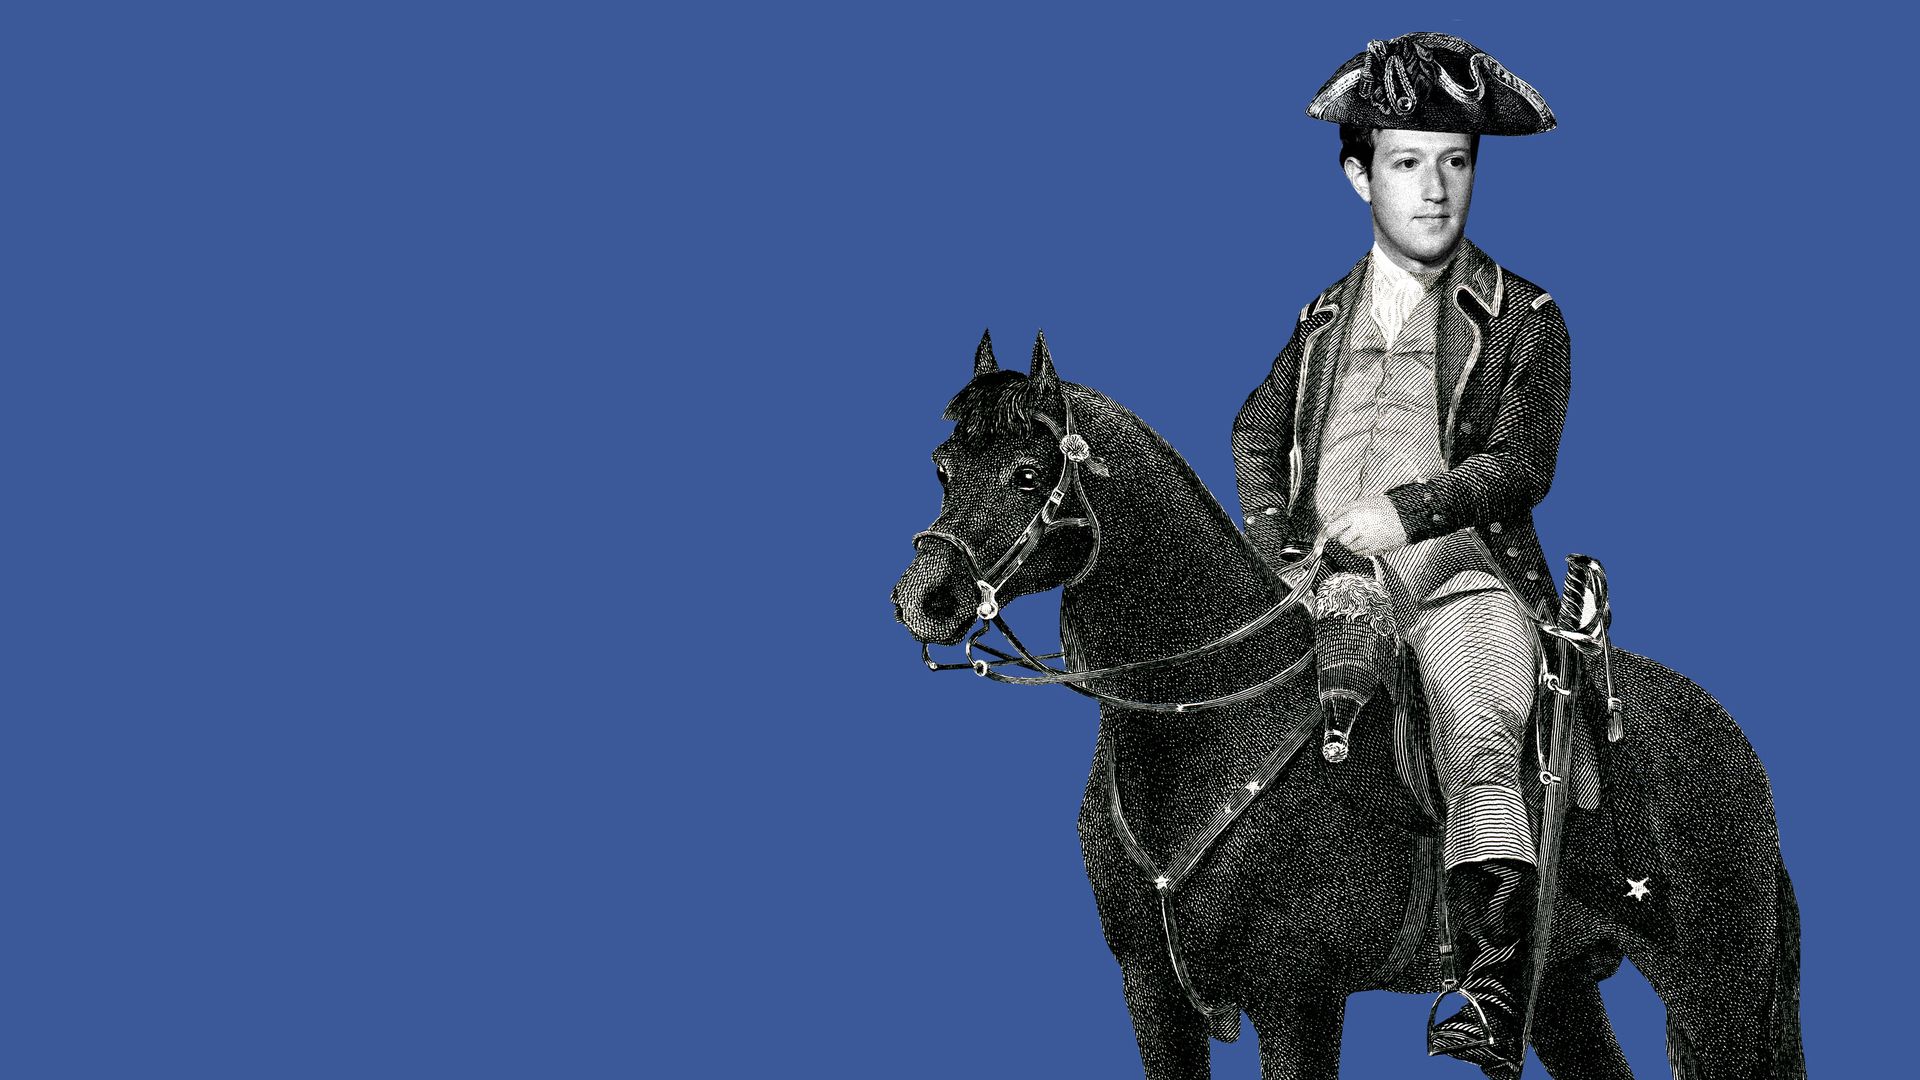 Illustration of Mark Zuckerberg on a horse with tricorn hat